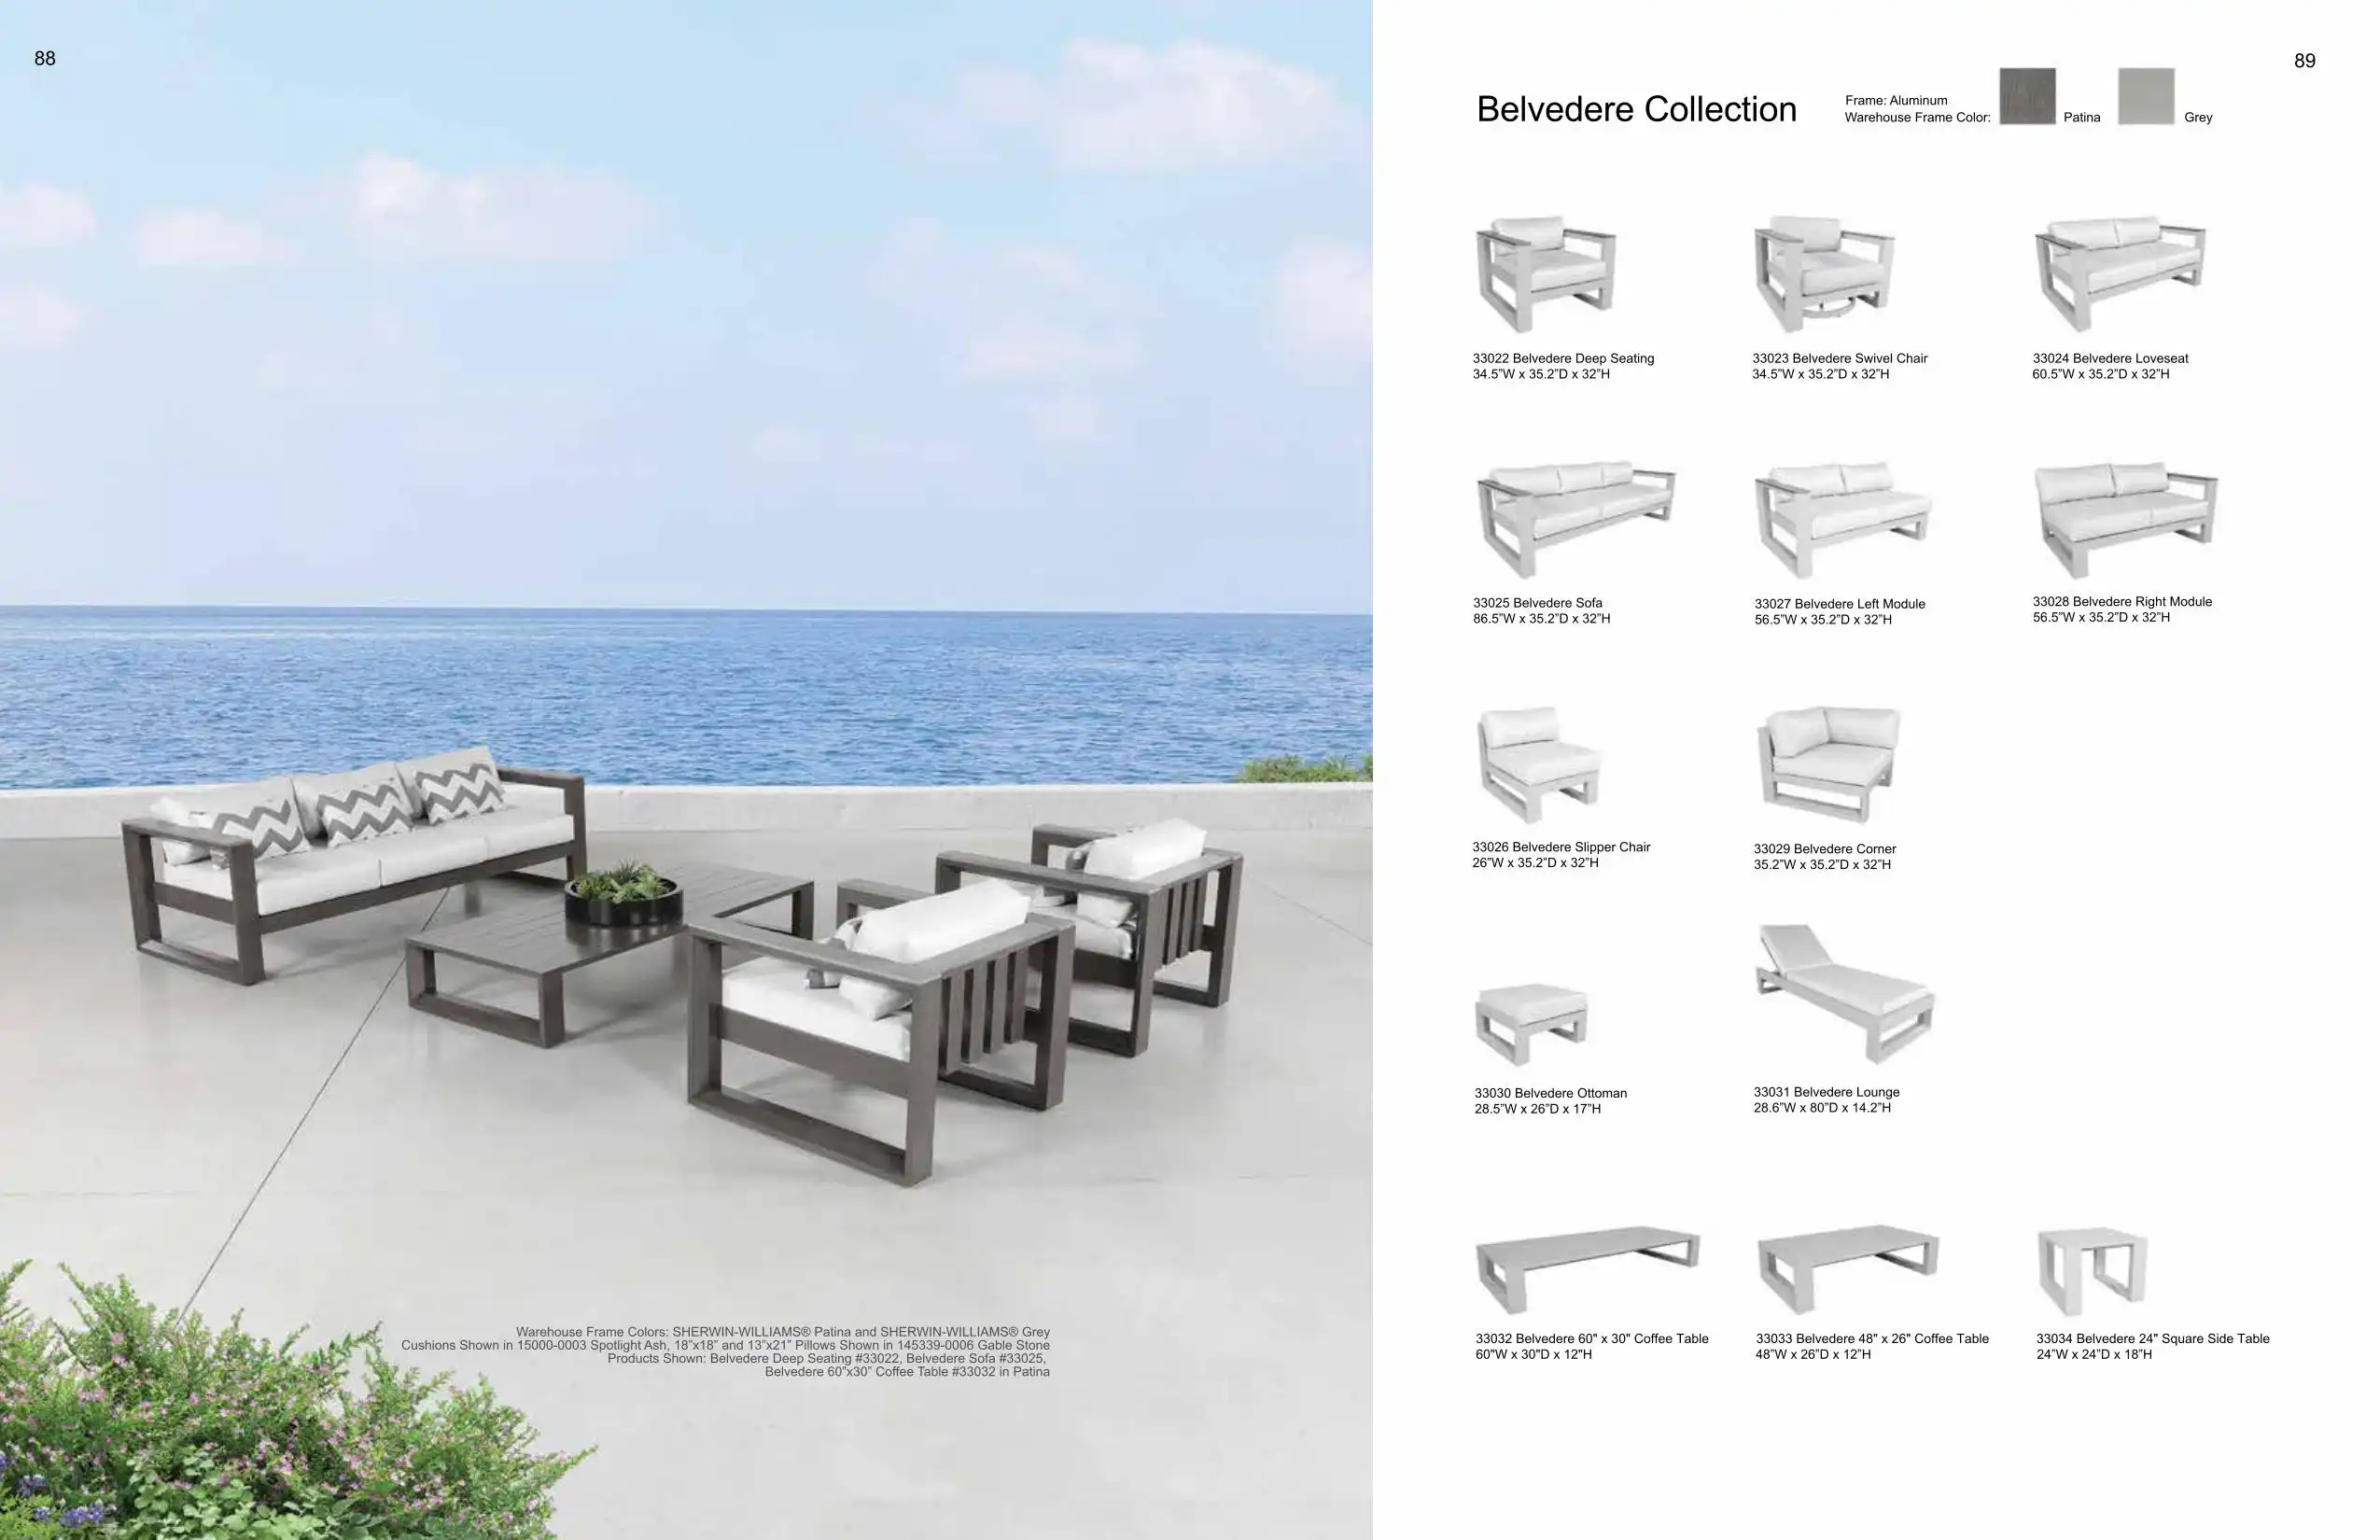 BELVEDERE Sofa & Lounging (ALUMINUM) Collection(s) by Cabana Coast 